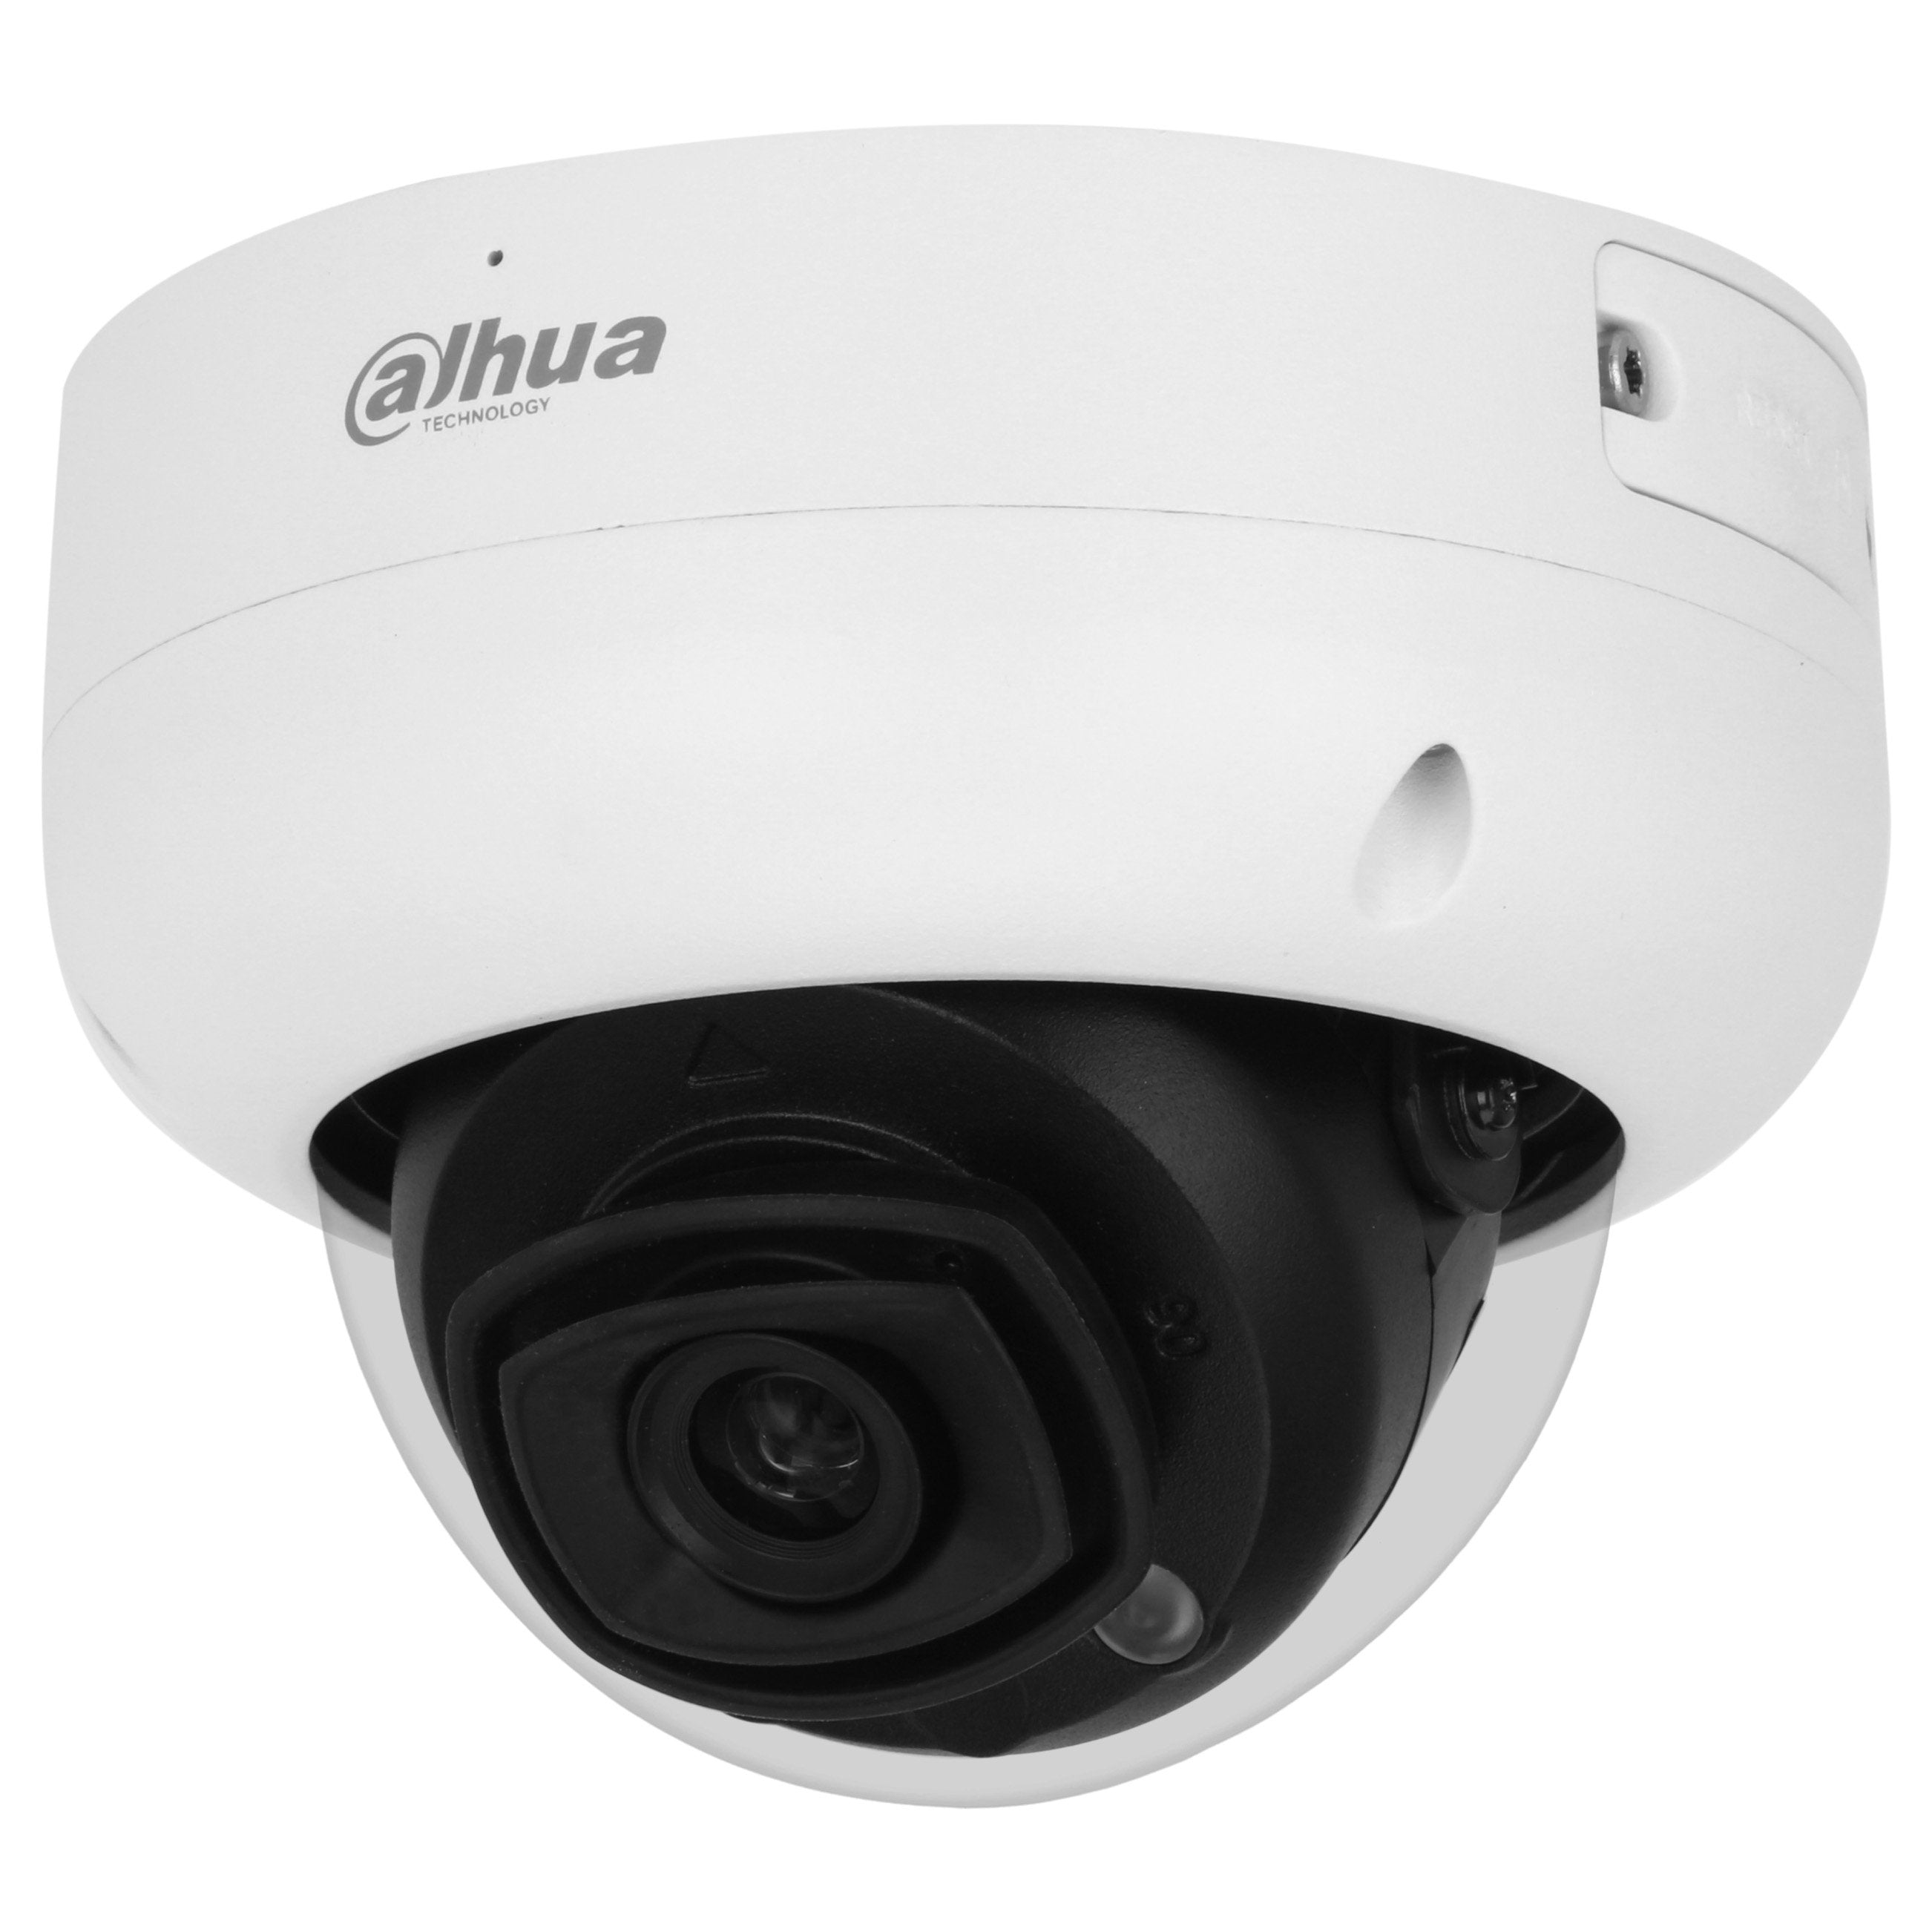 Dahua 5MP IP WizMind S Series IR Vandal Dome Camera, SMD 3.0, Acupick, Face Detection, Face Attributes, People Counting, Perimeter, Starlight, 2.8mm, 120dB WDR, 50m IR, ePOE / 12VDC, IP67, IK10, MicroSD, Built-in Mic (Junction Box: PFA137)